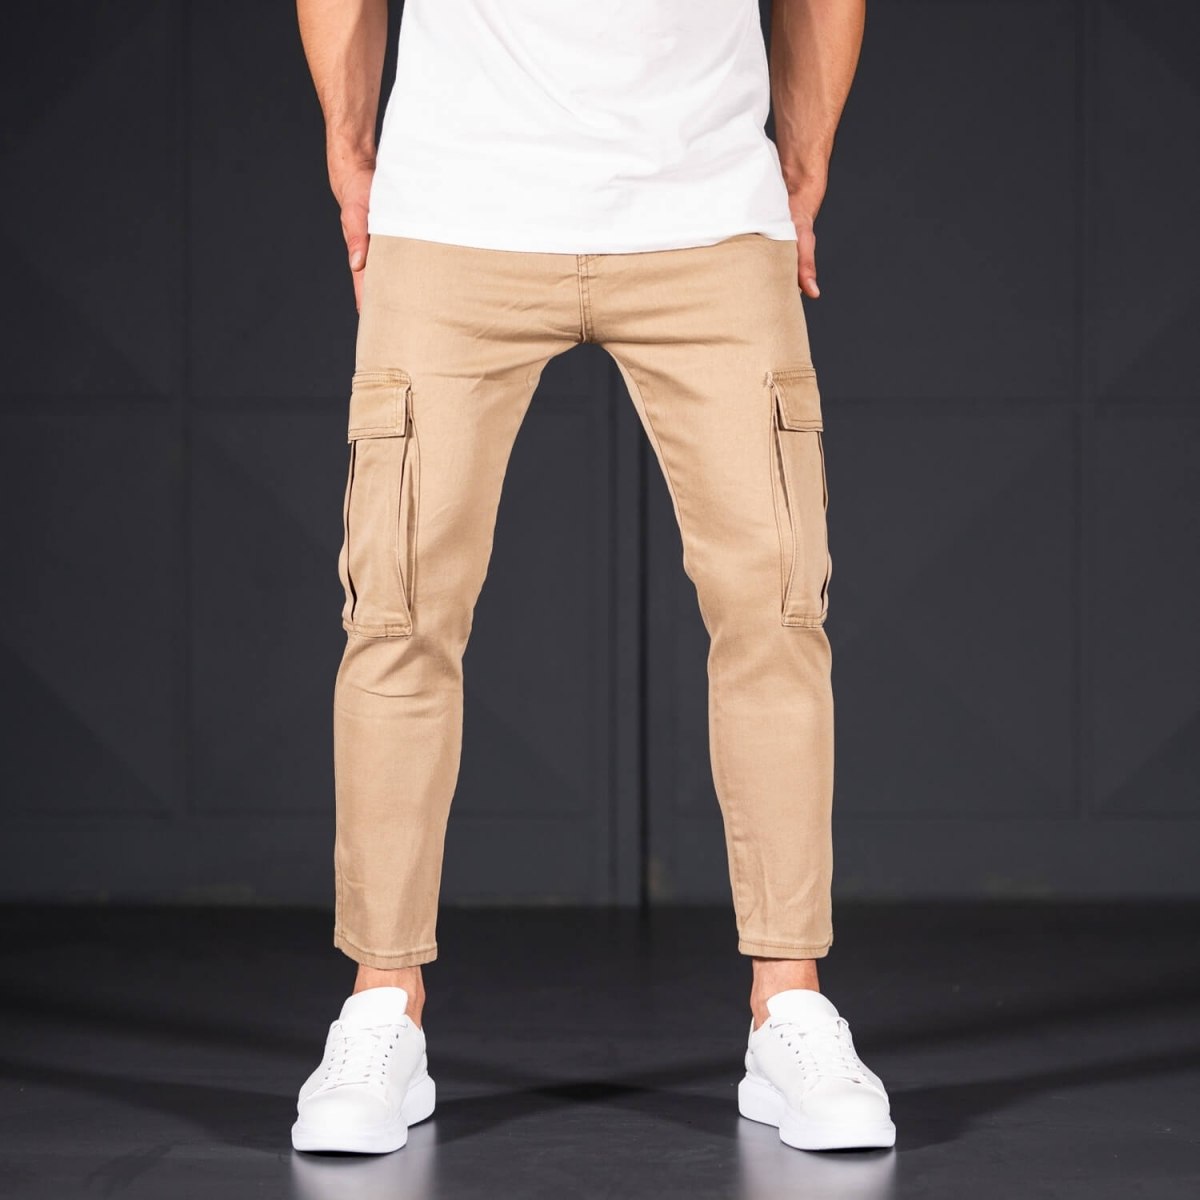 Men's Jeans with Pockets Style in Camel - 1